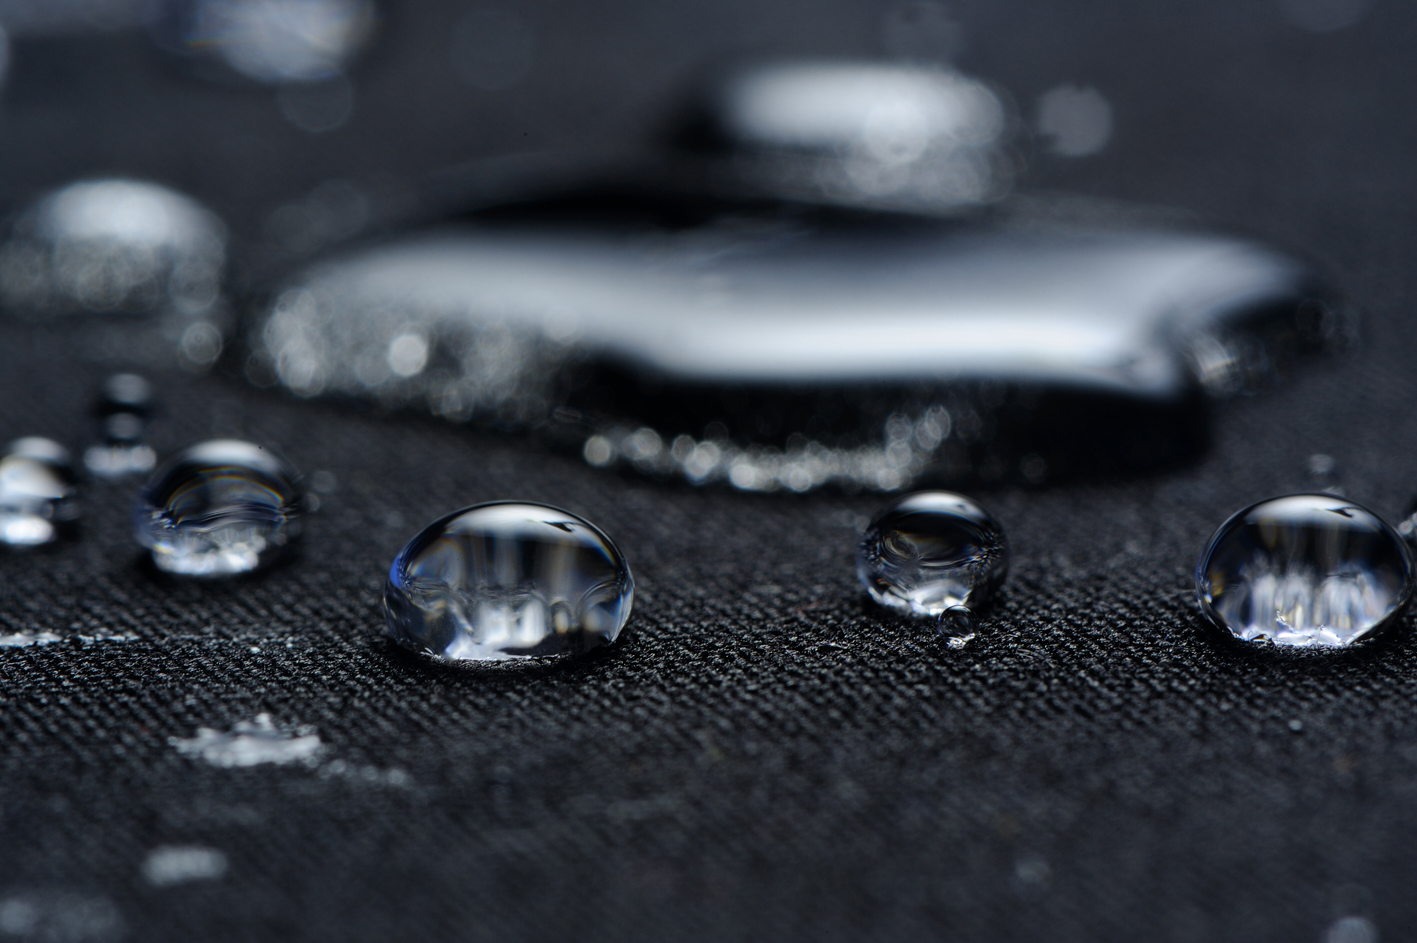 The textile industry was challenged to develop a material that would repel rain, but at the same time be breathable for the wearer. © Shutterstock